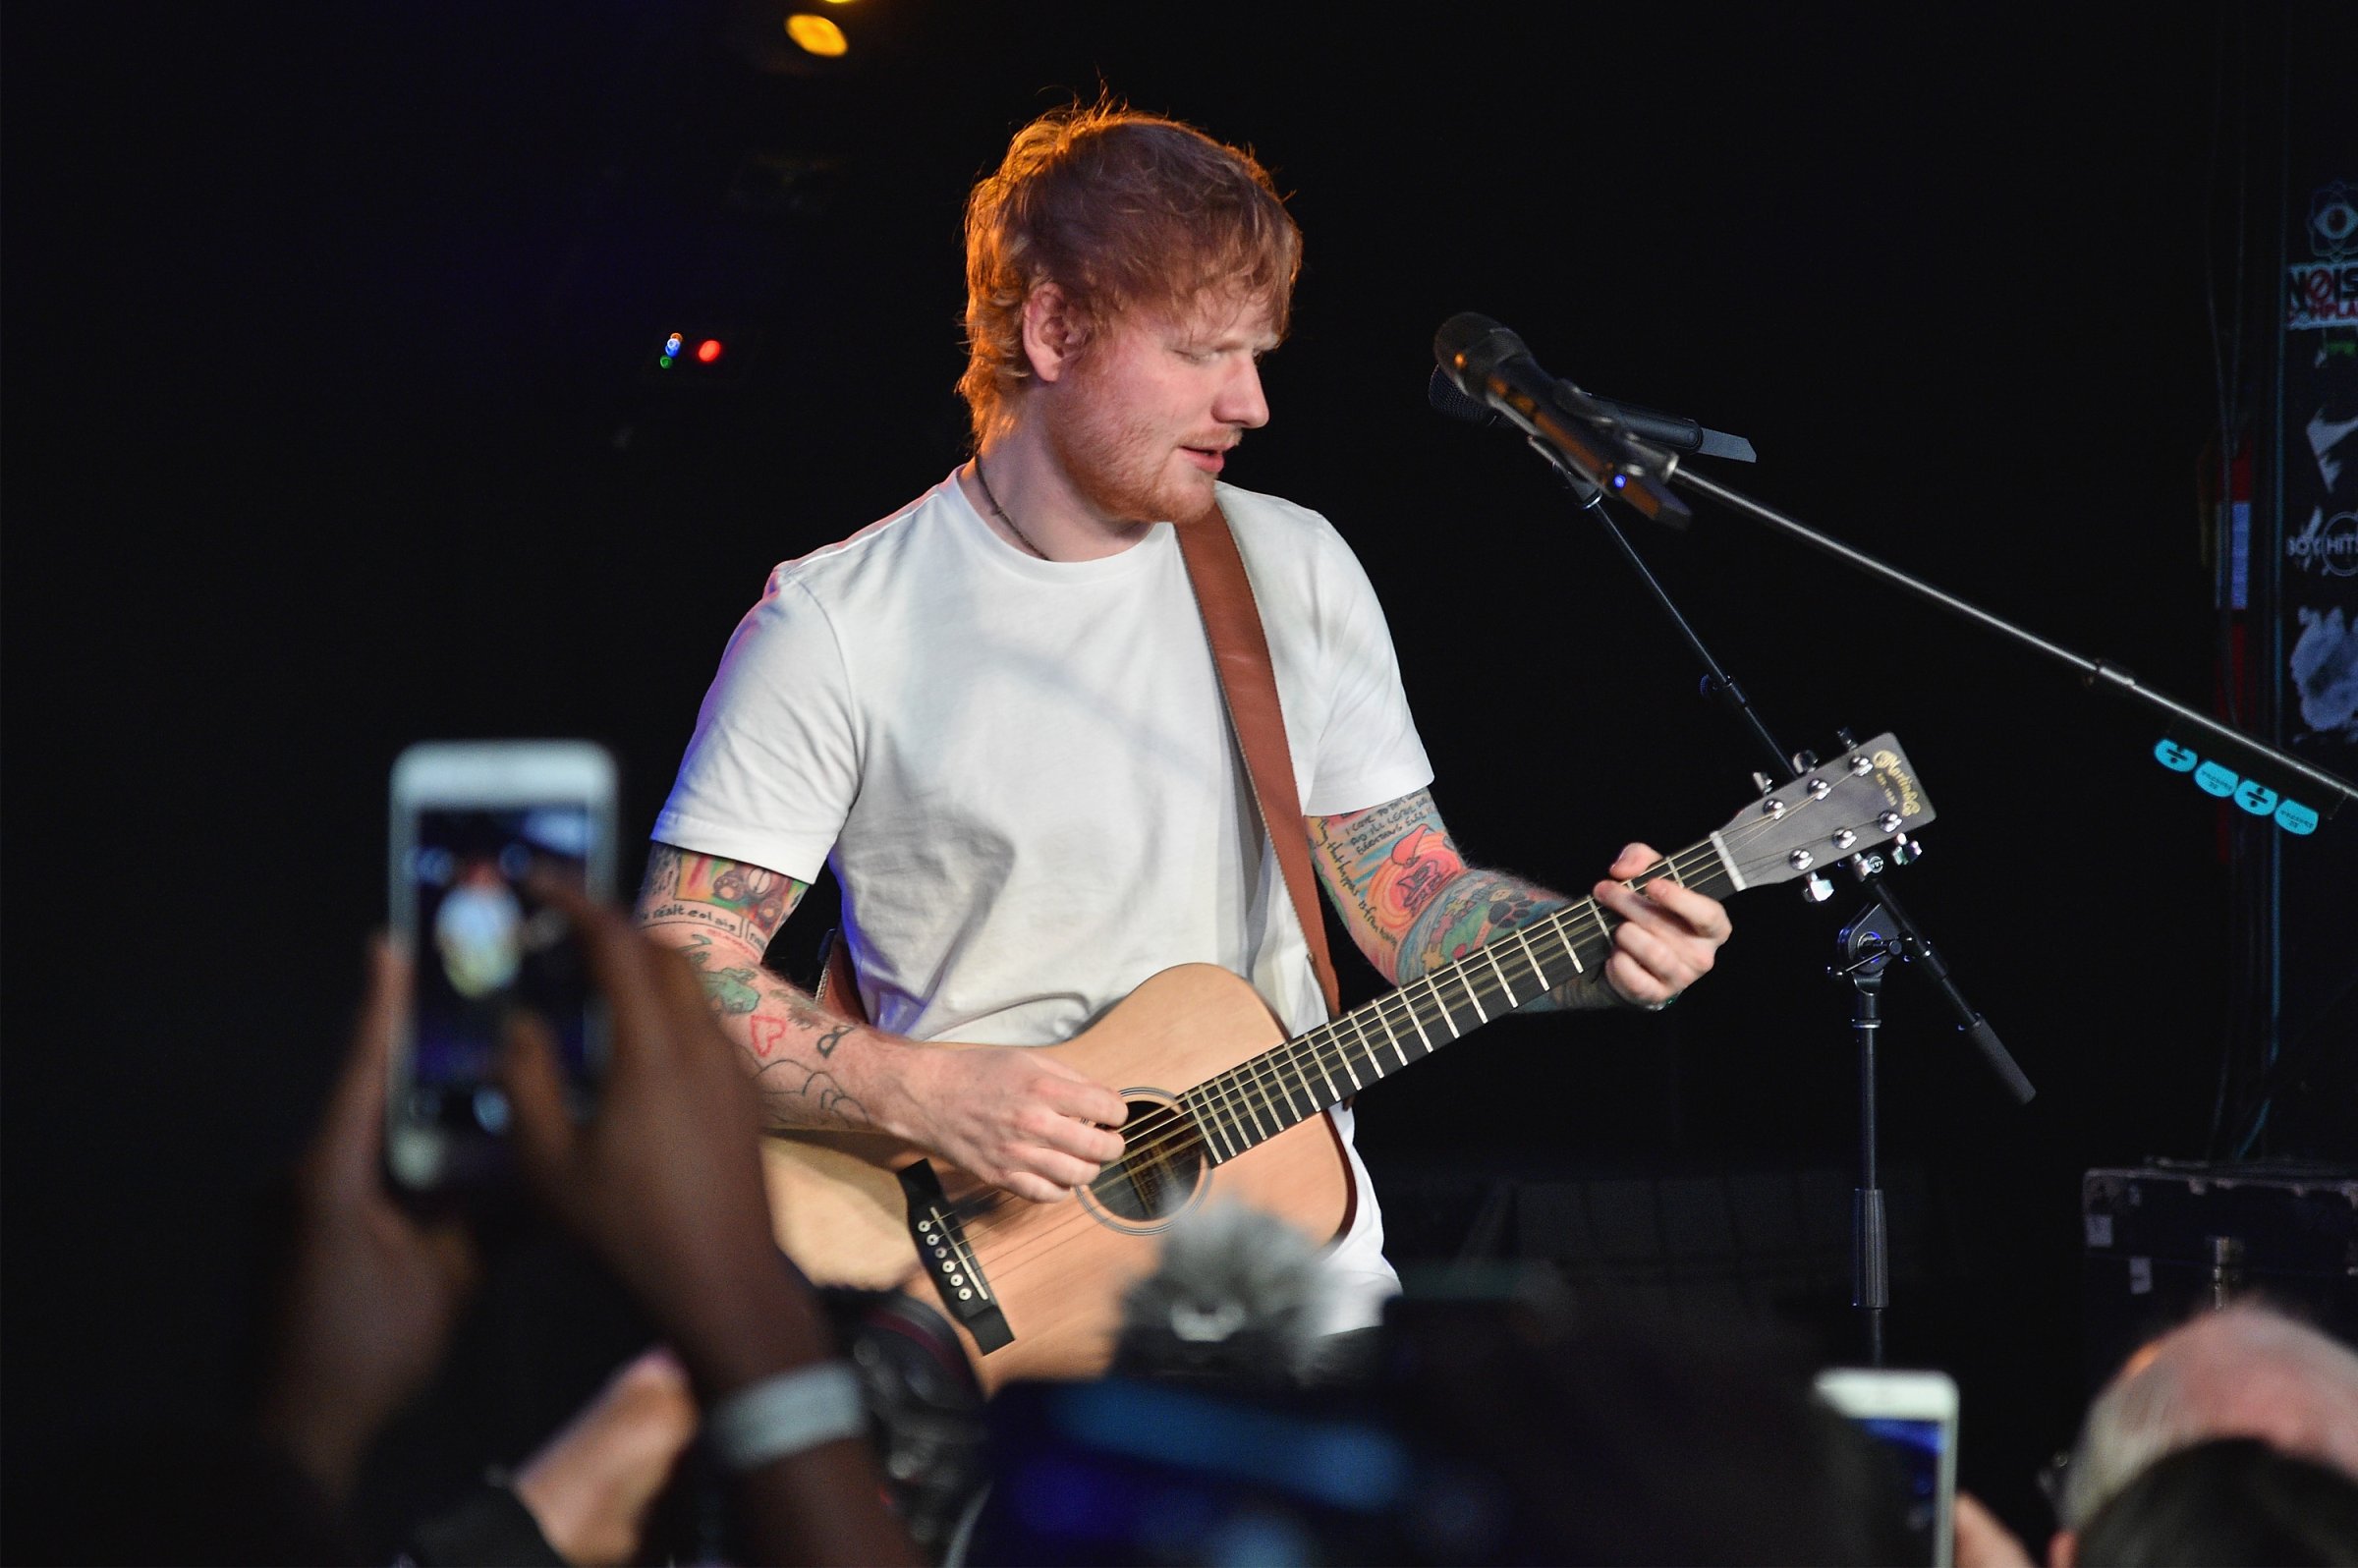 Ed Sheeran Performs For SiriusXM's "Secret Show" Series At The Studio At Webster Hall; Performance To Air On SiriusXM Hits 1 And The Pulse Channels